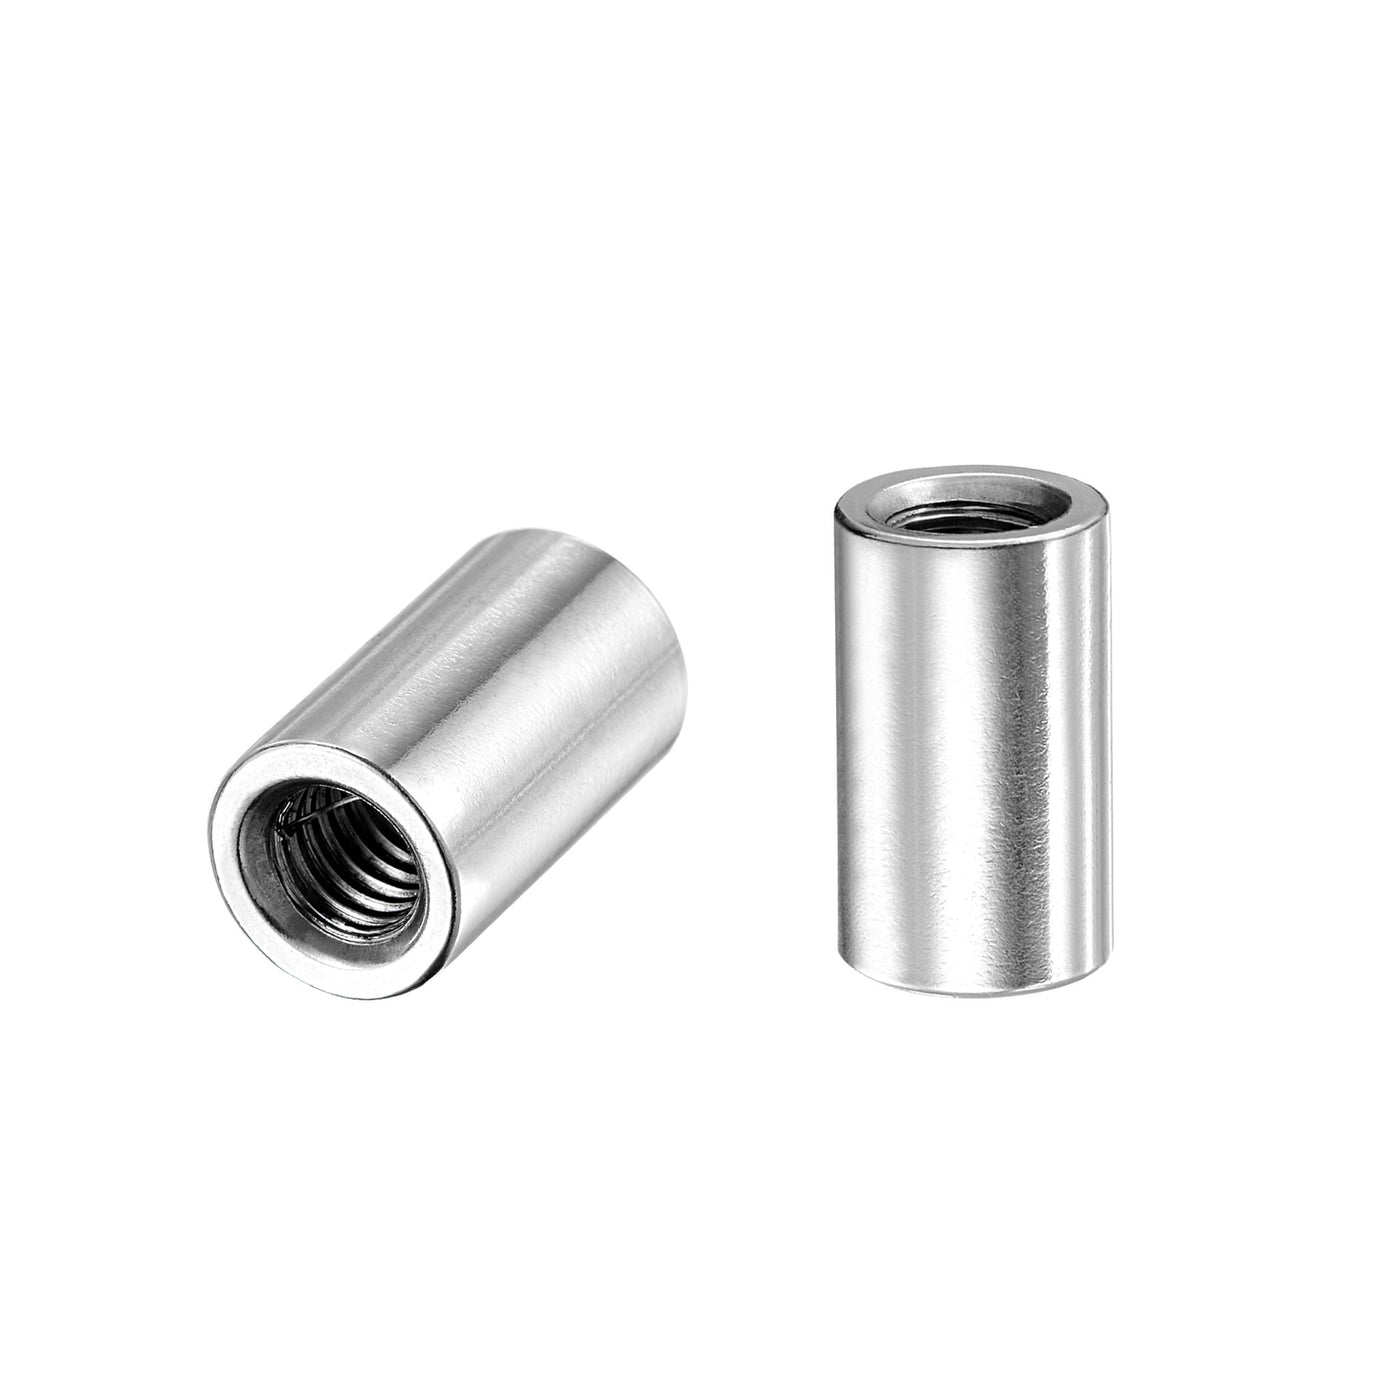 Uxcell Uxcell M10x14mmx13mm Weld On Bung Nut Threaded 201 Stainless Steel Insert Weldable